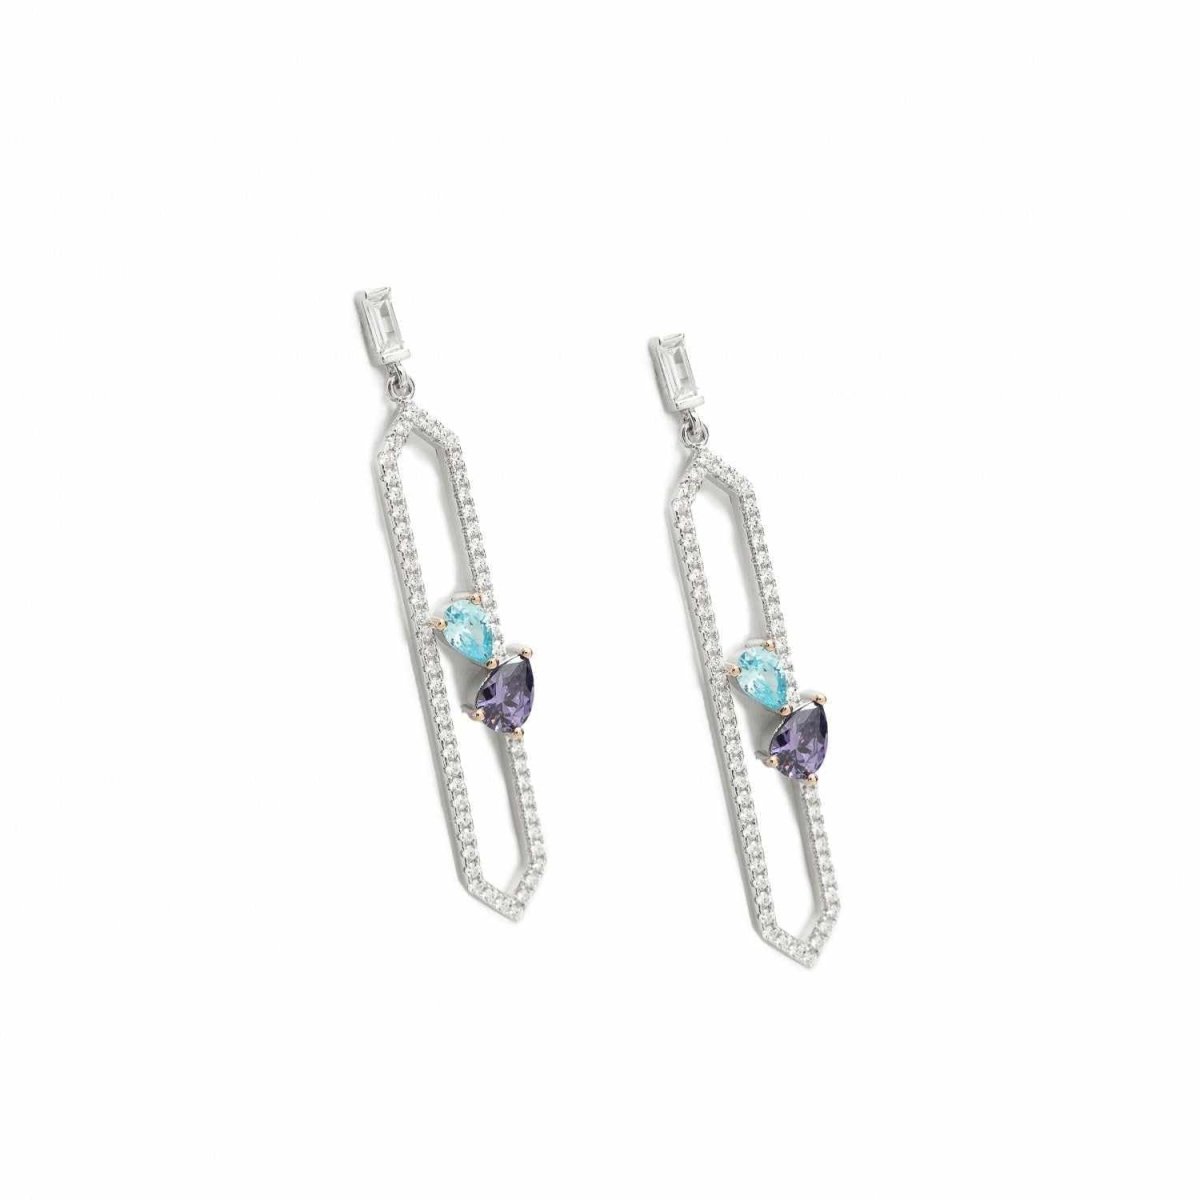 Earrings - Thin long earrings in silver with double gemstone and zirconia